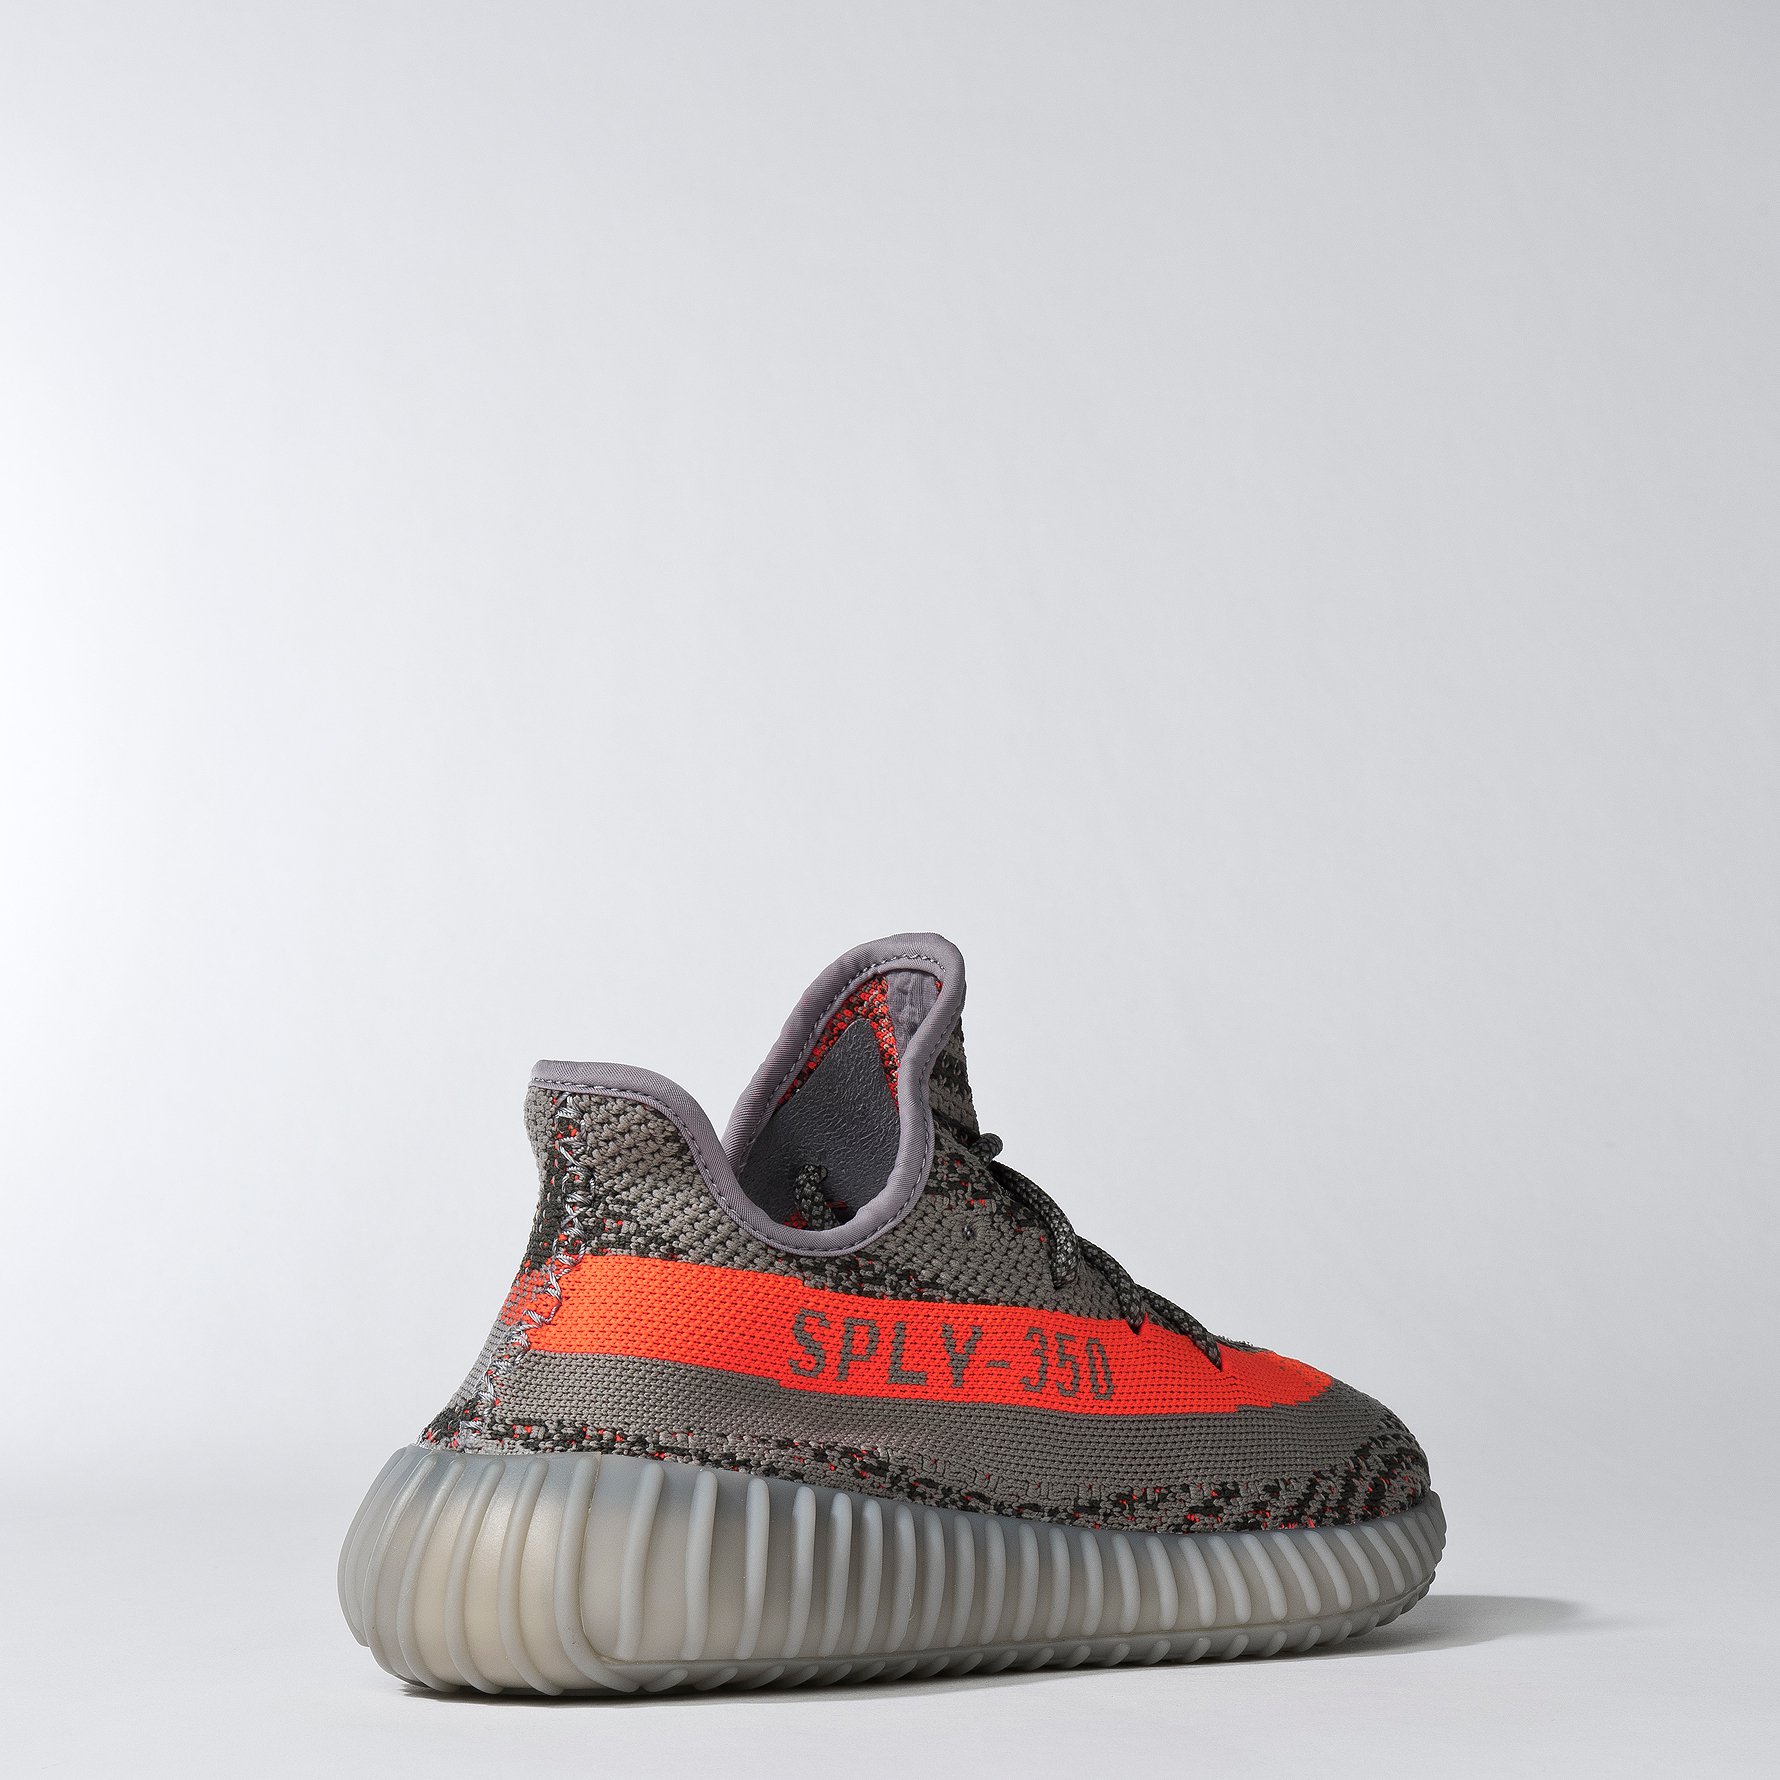 Links to the adidas Yeezy Boost 350 V2 'Beluga' are Available Now